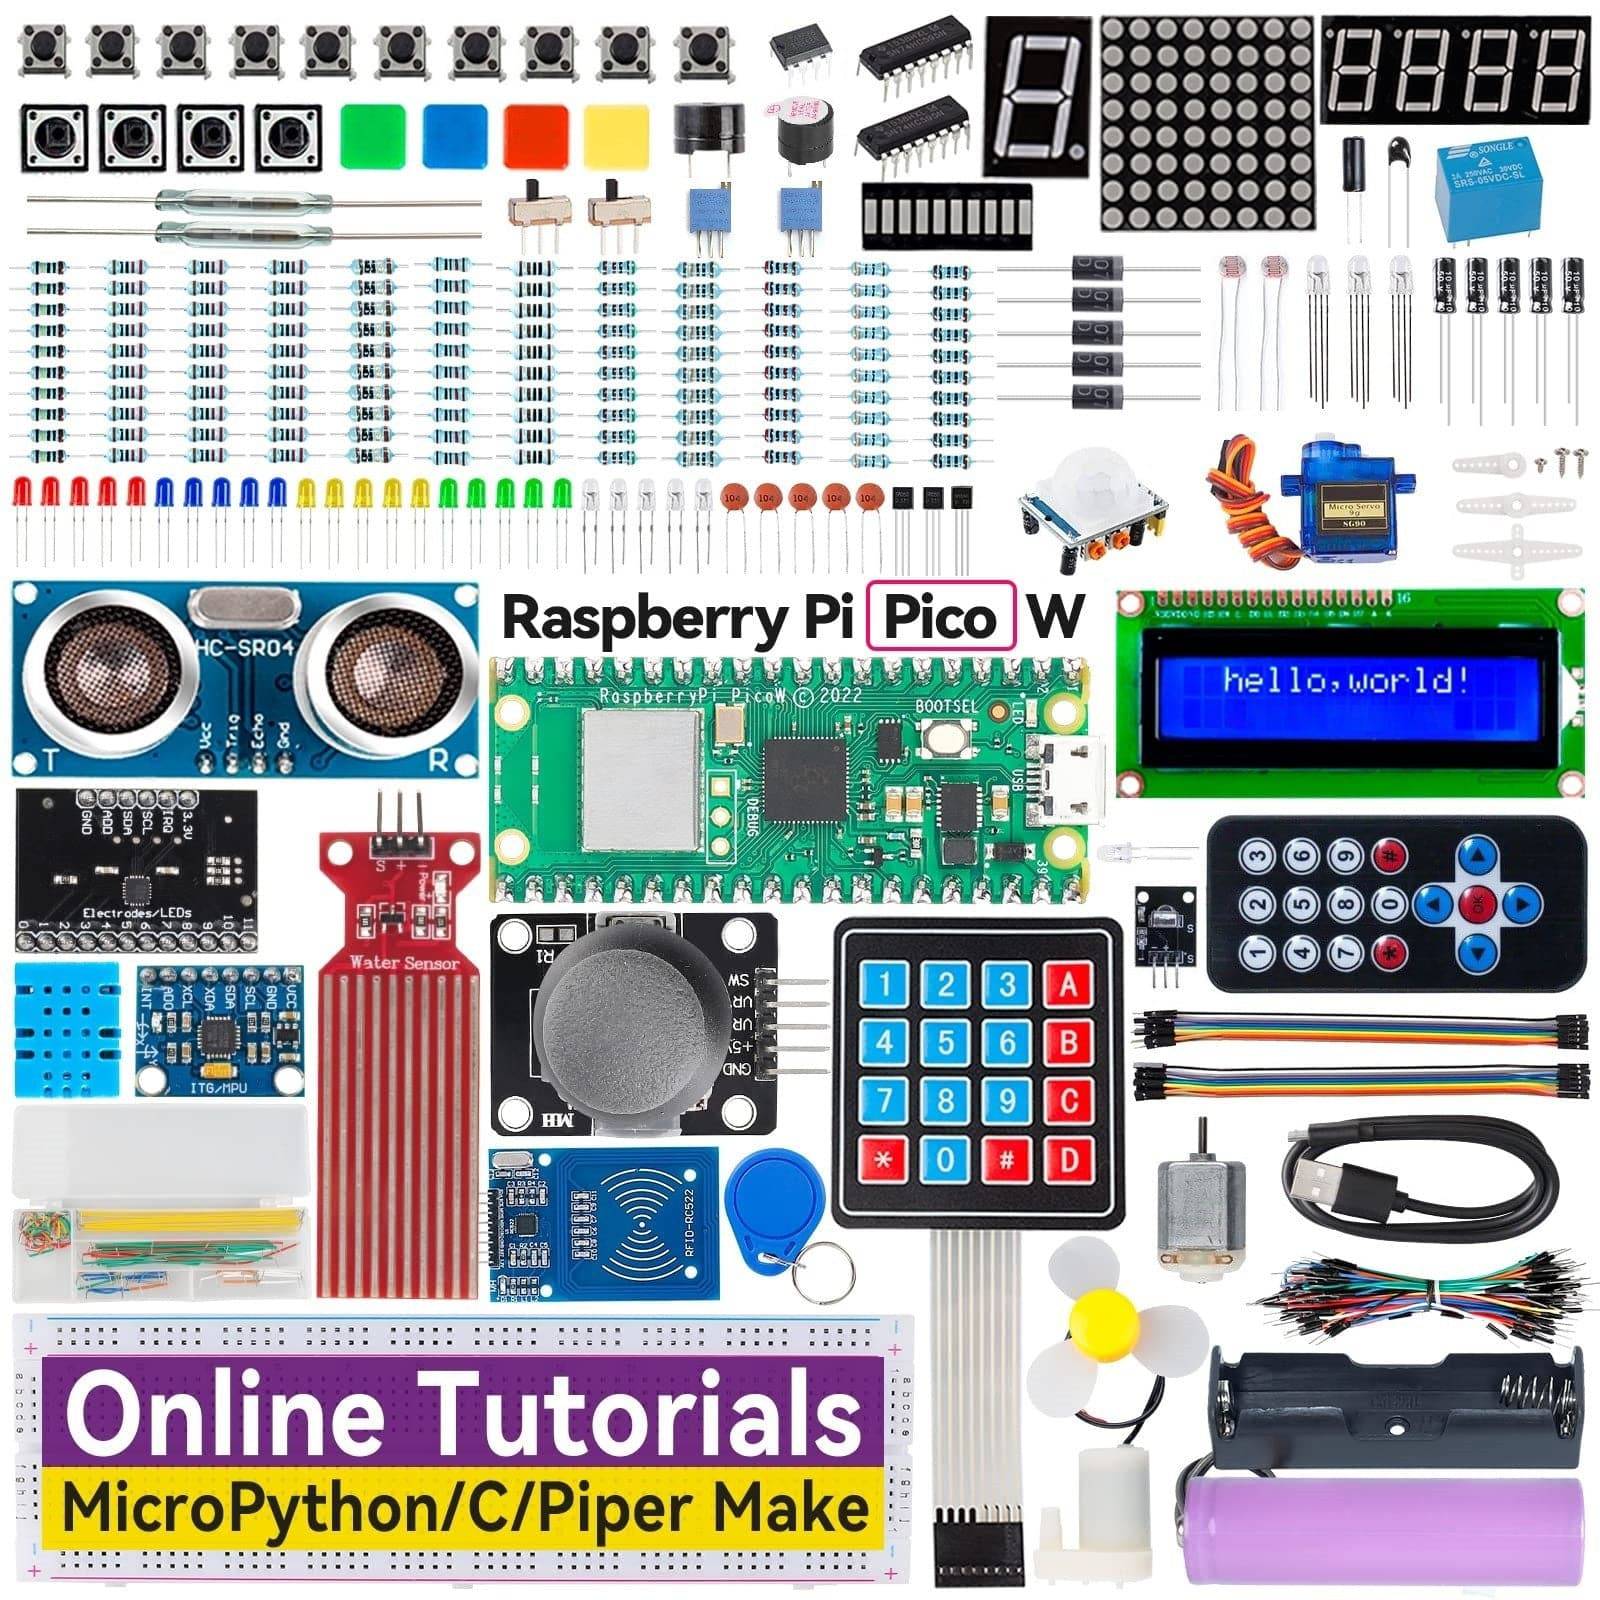 Raspberry Pi Pico W Ultimate Starter Kit, 450+ Items, MicroPython, Piper Make and C/C++ (Compatible with Arduino) - B0BDFVL6F_X - REES52